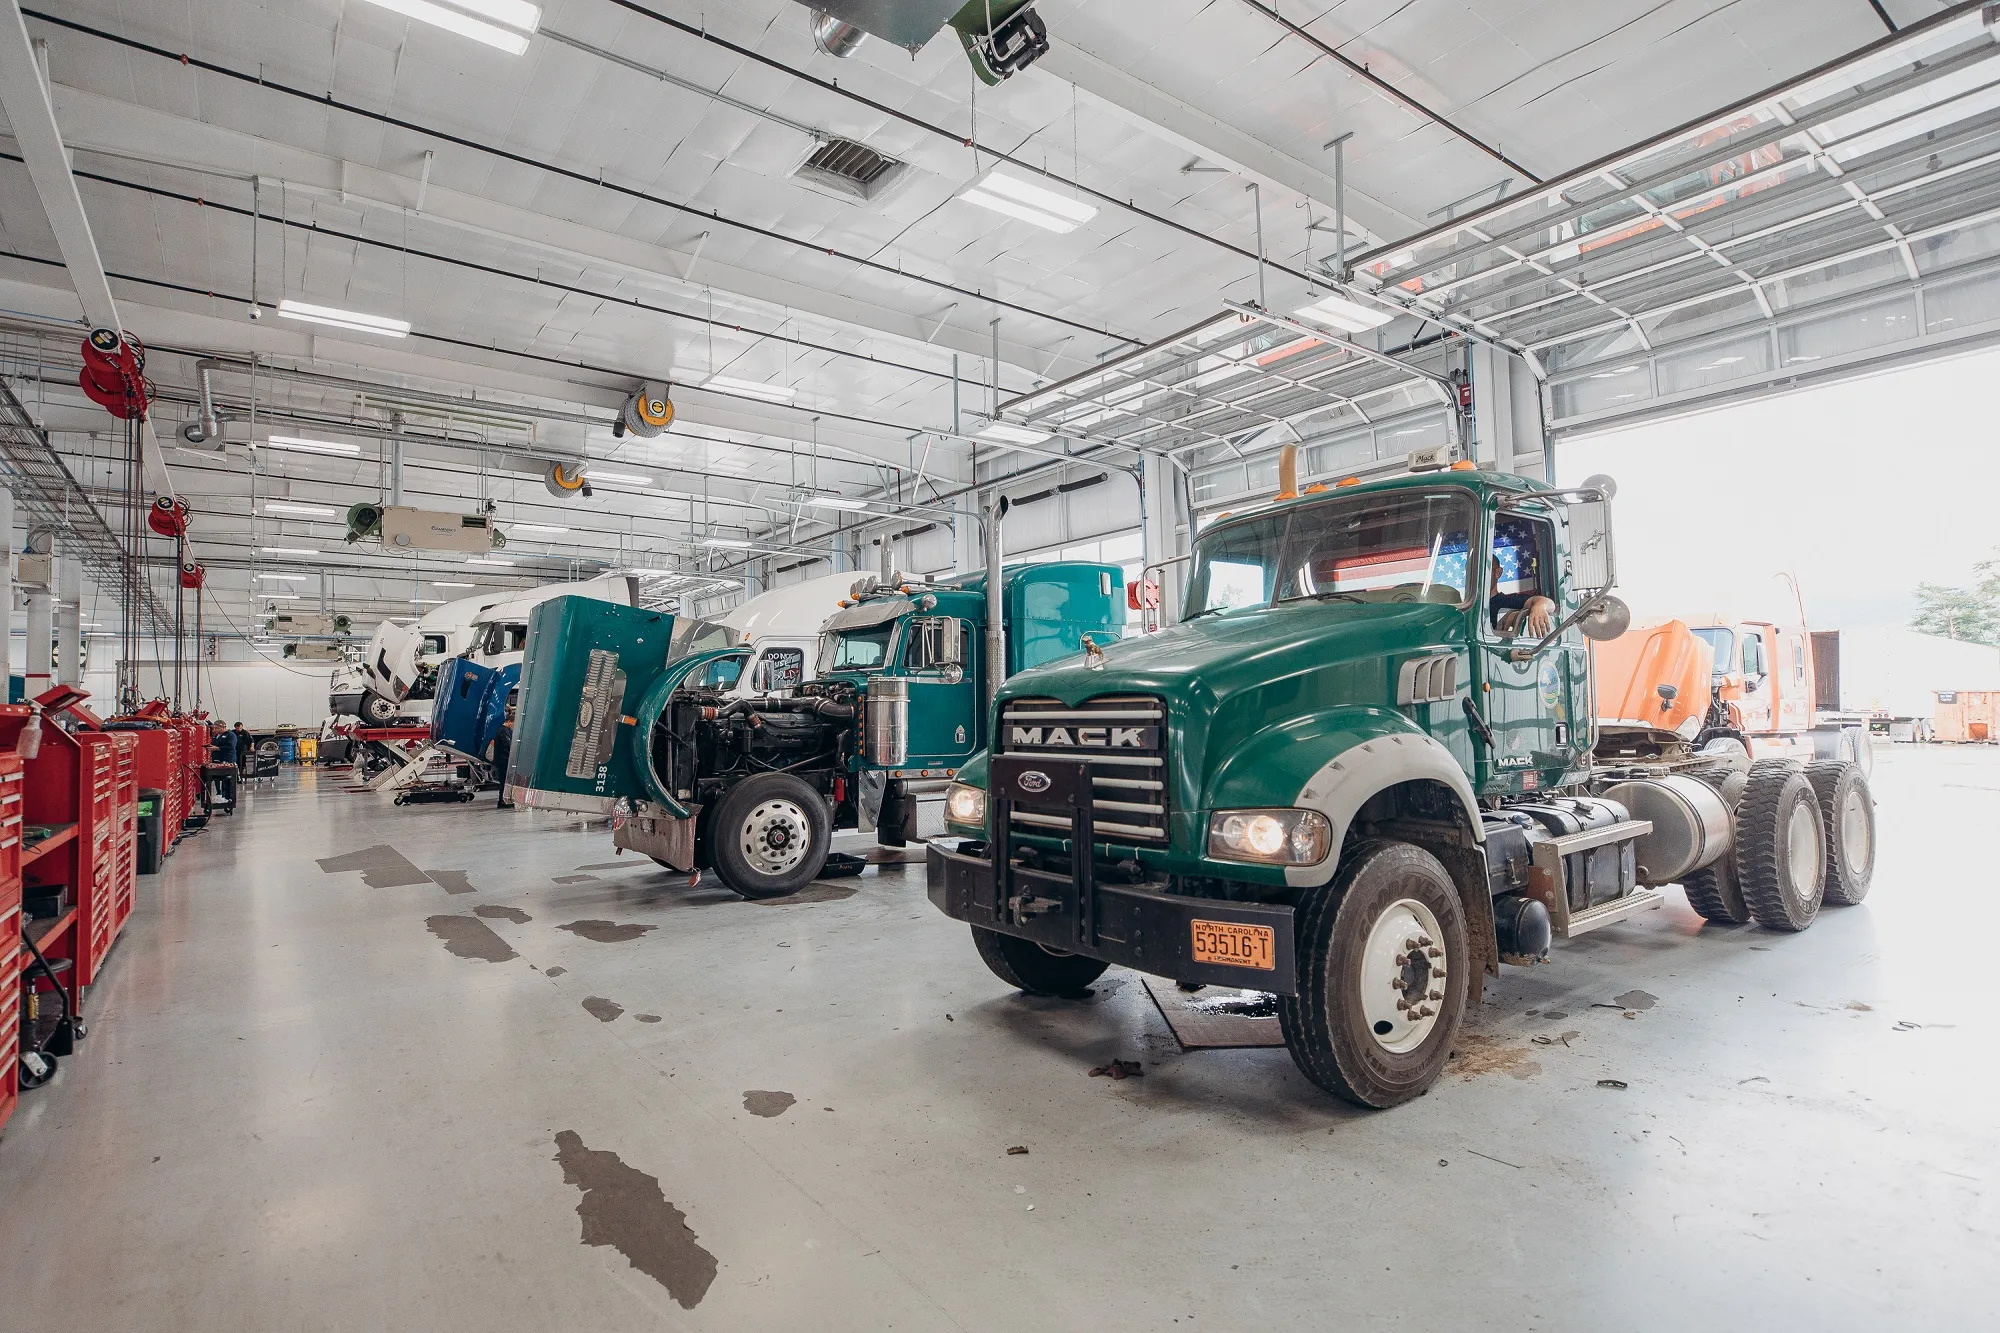 Commercial Truck Differential Repair: Big Truck Service Near Asheville, NC